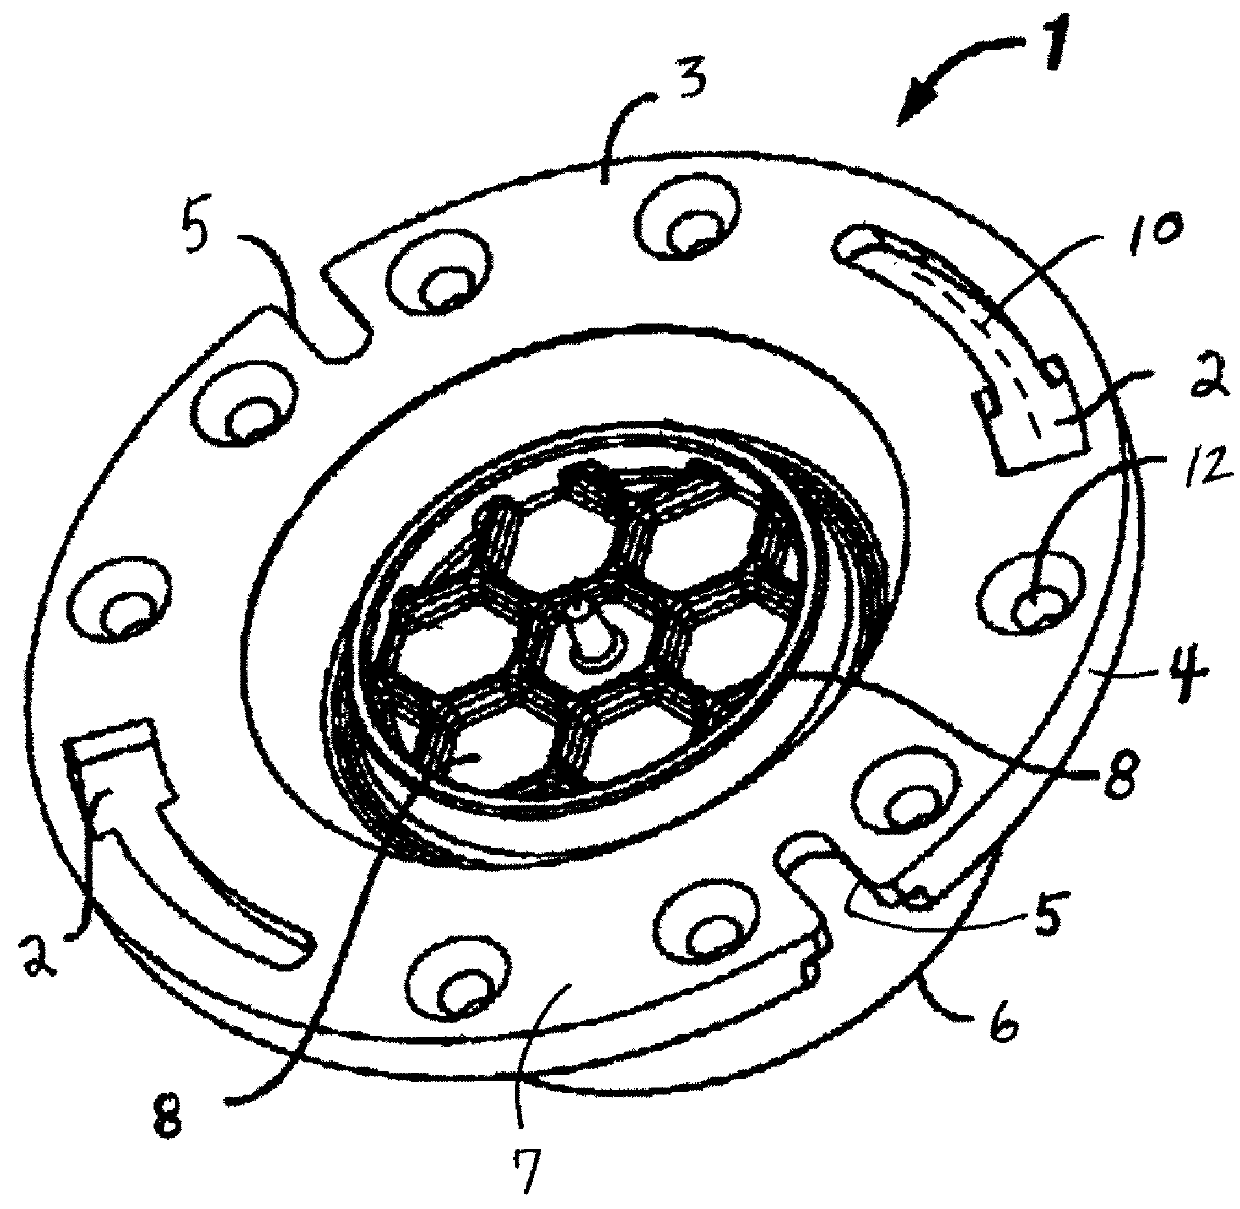 Toilet flange assembly with cover